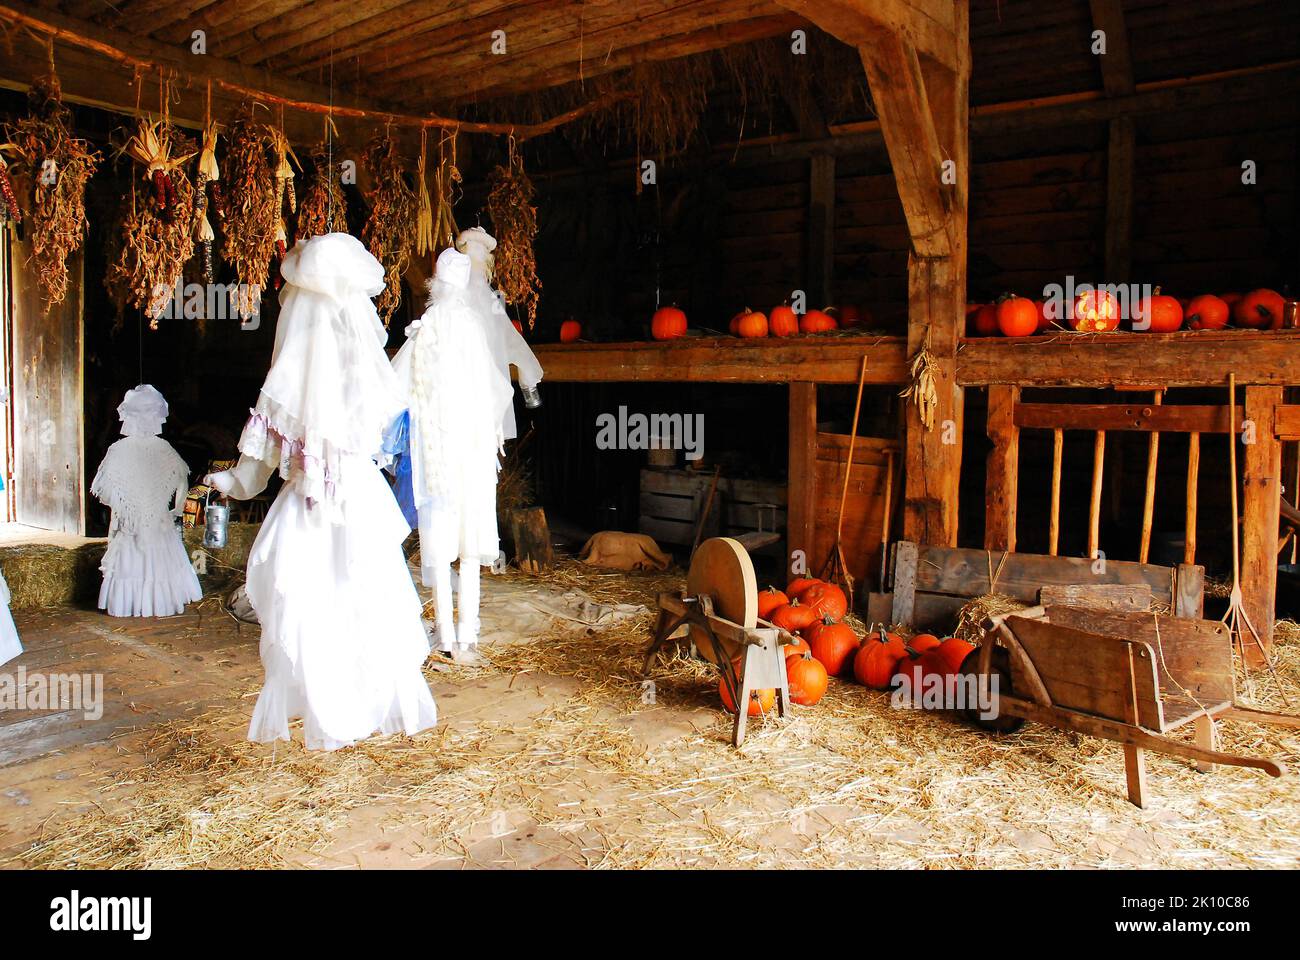 Ghosts made of sheets make for traditional Halloween decorations in a historic wooden barn in Sleepy Hallow in Autumn Stock Photo